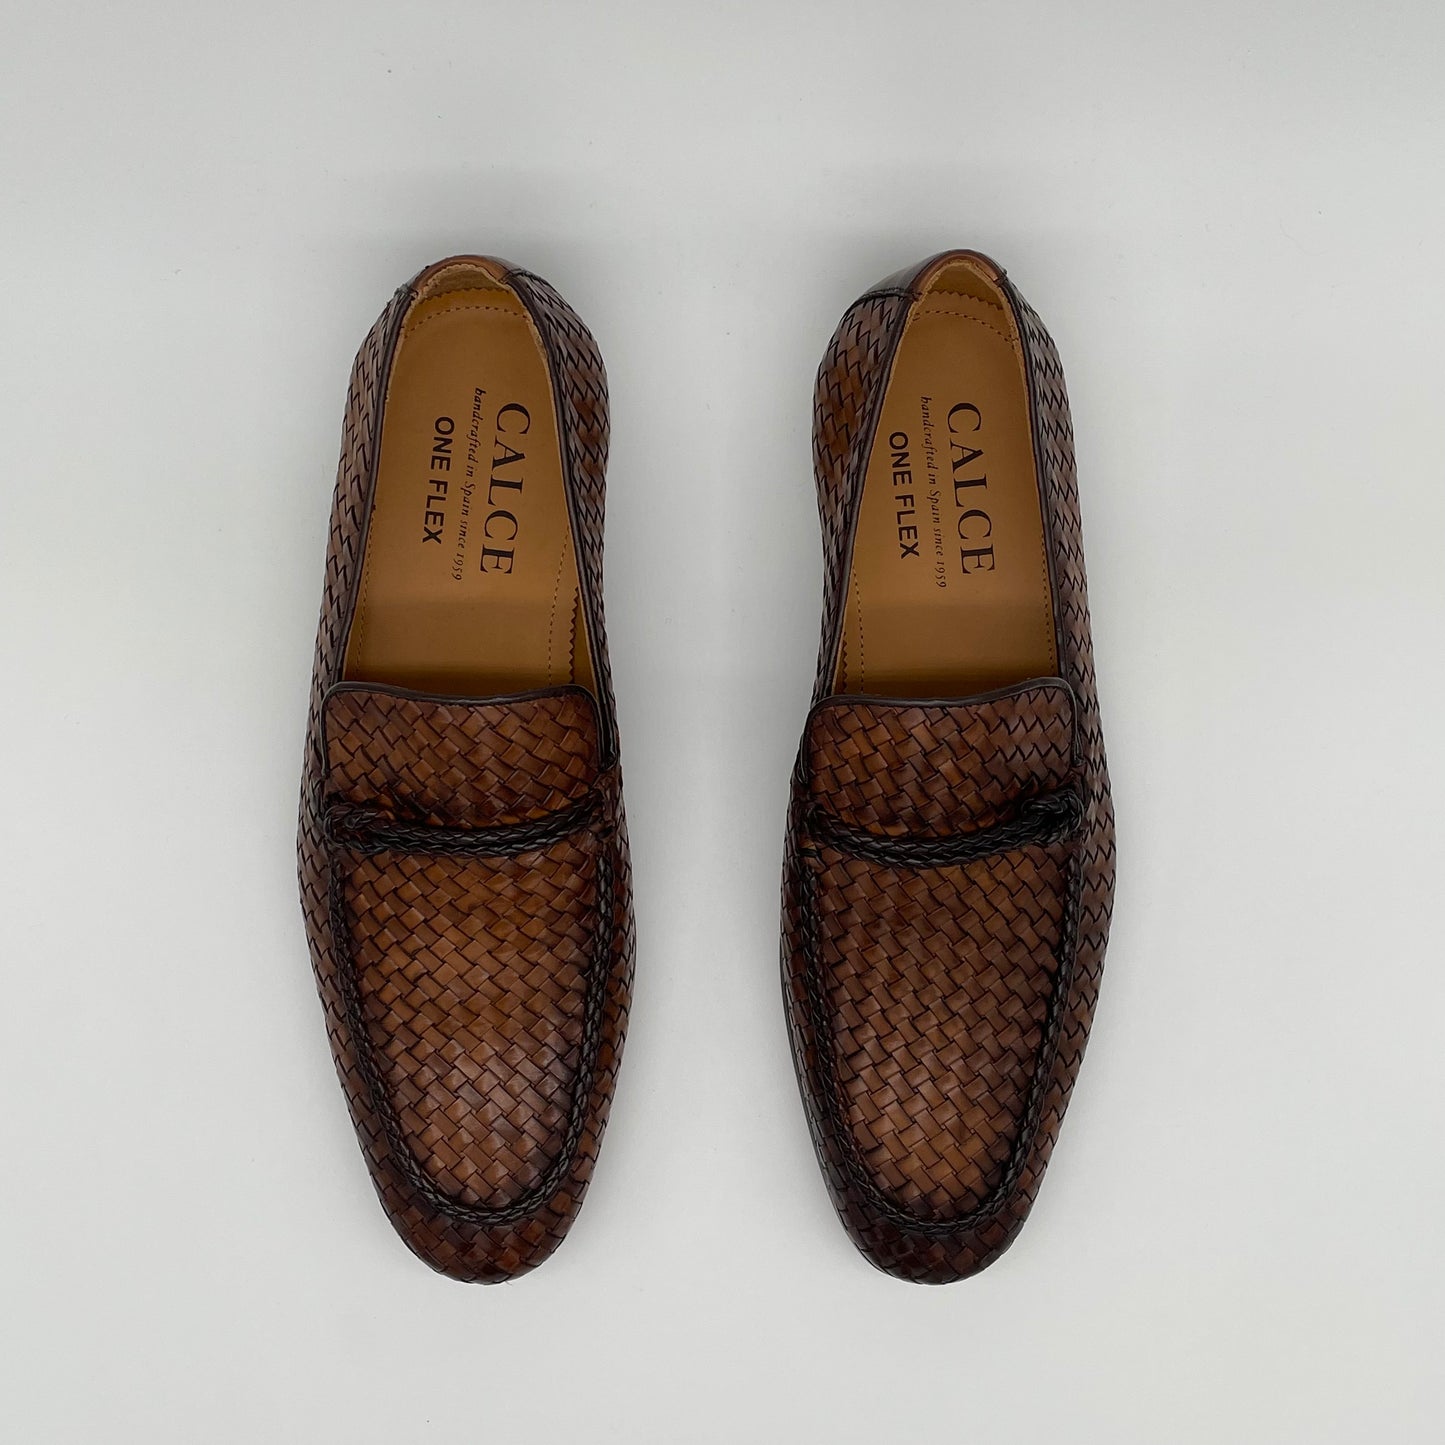 Braided Leather Penny Loafer - Cognac